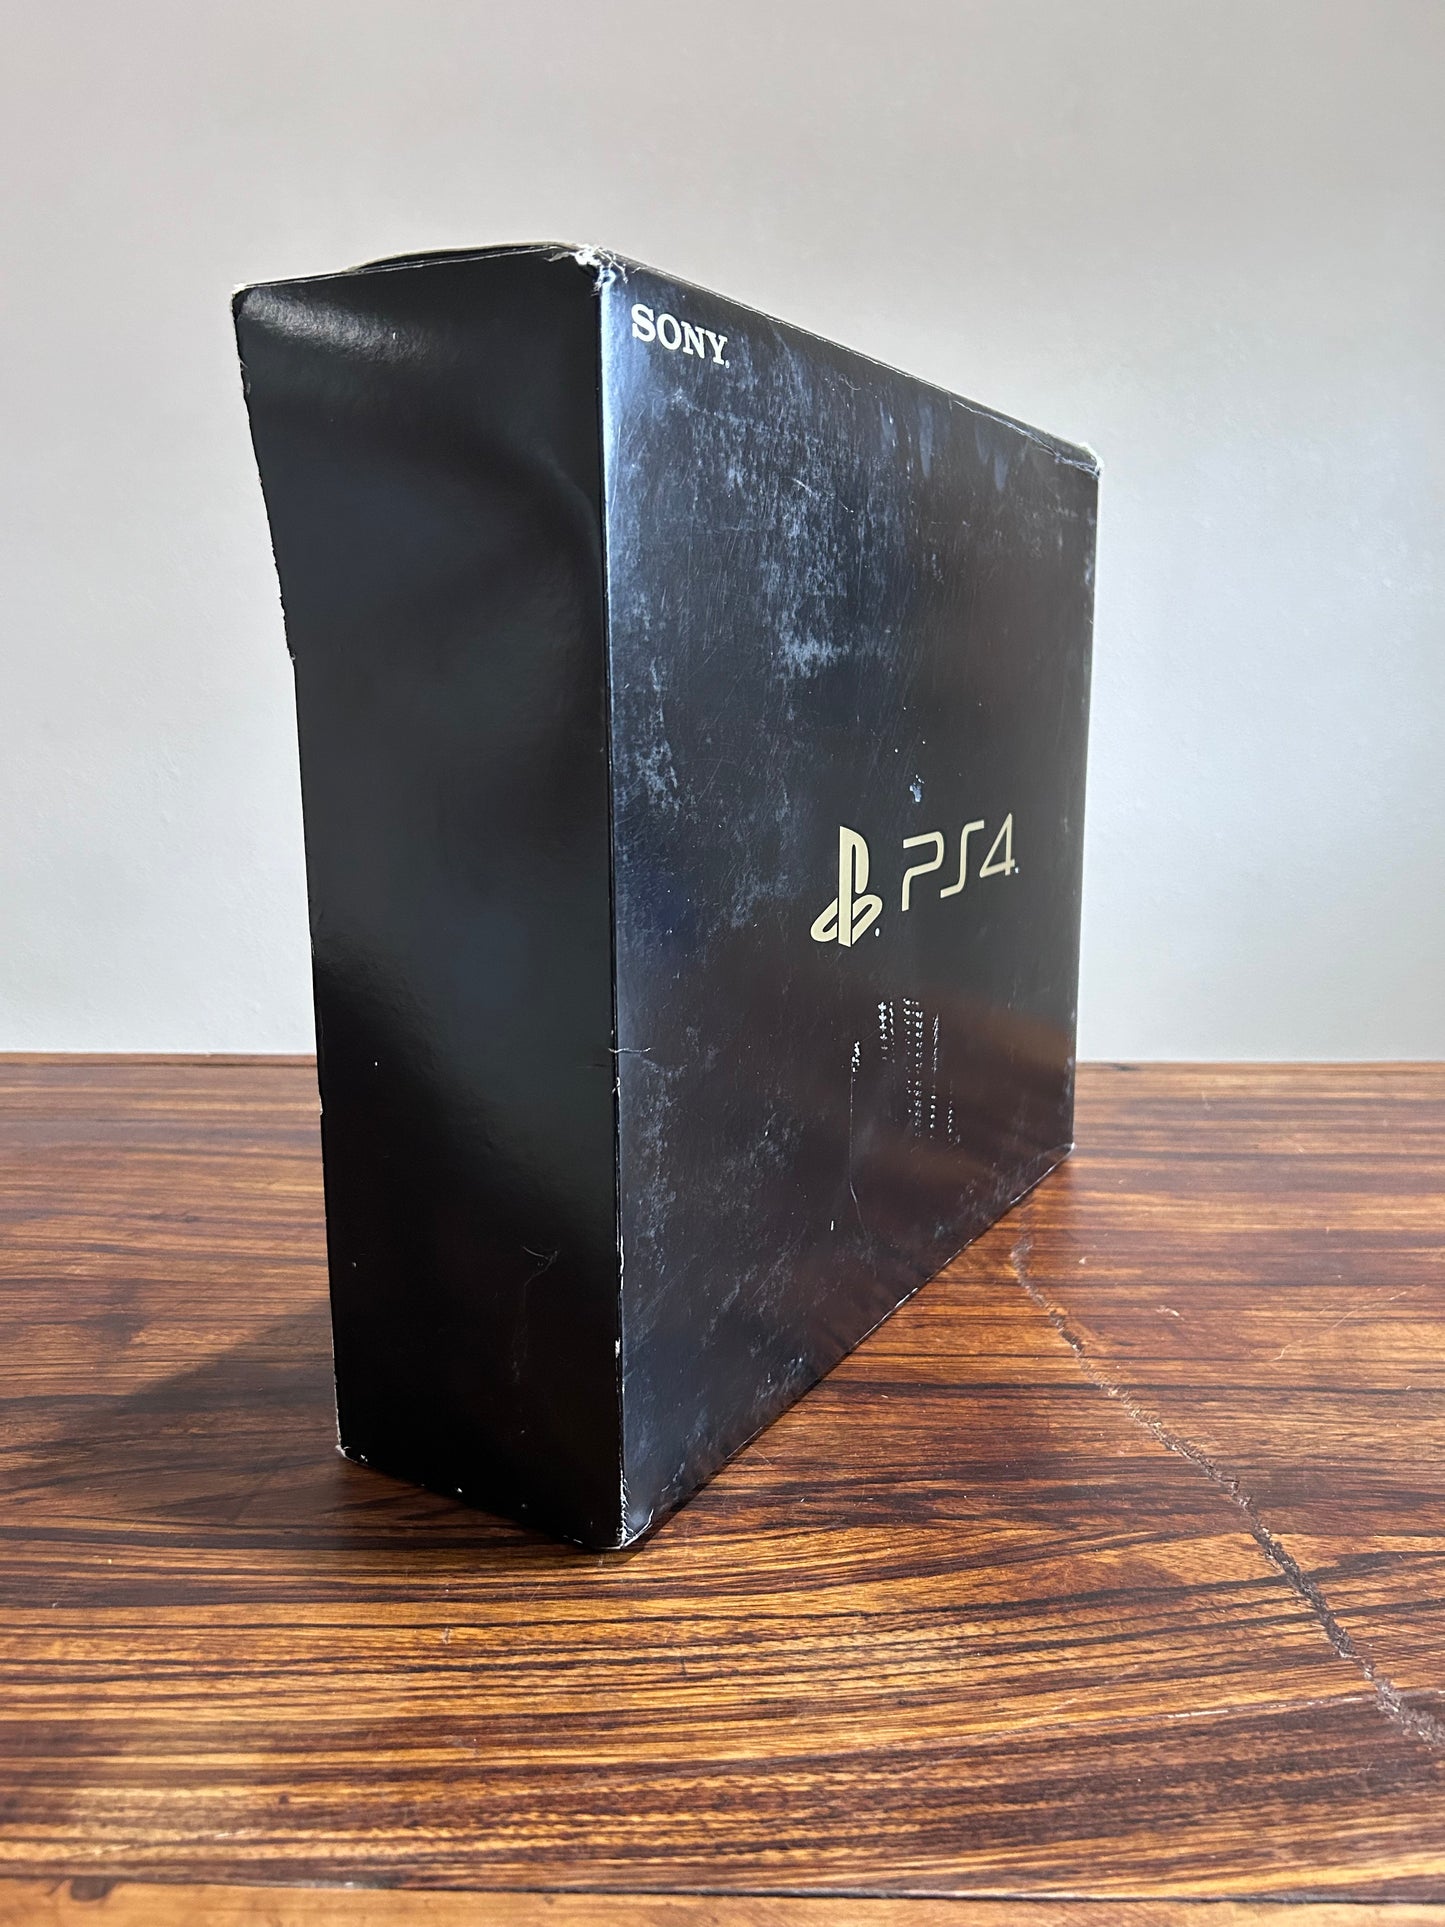 PS4 Taco Bell Gold Console